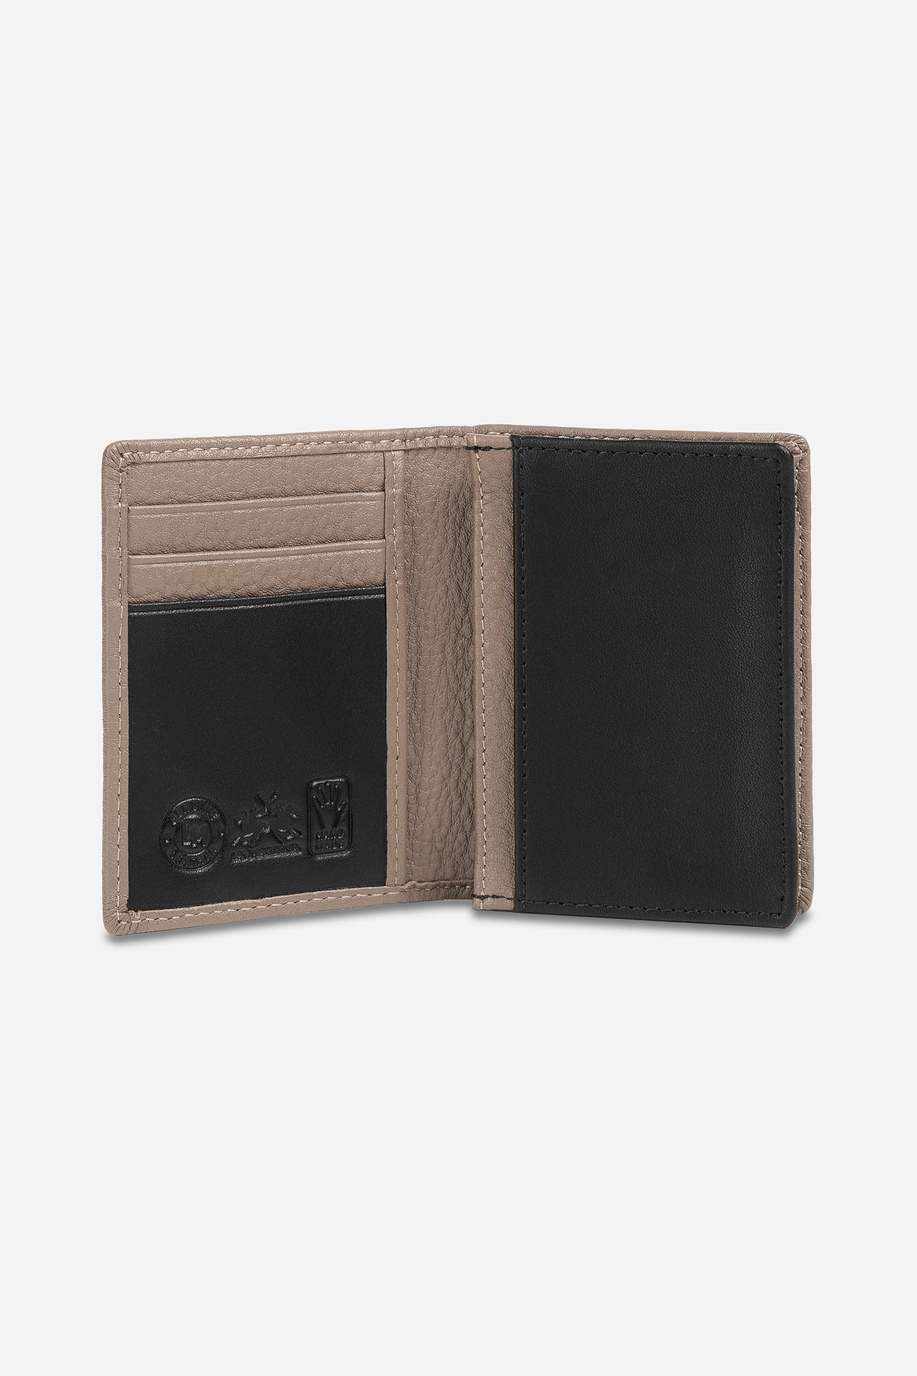 Leather wallet in solid colour - Wallets and key chains | La Martina - Official Online Shop